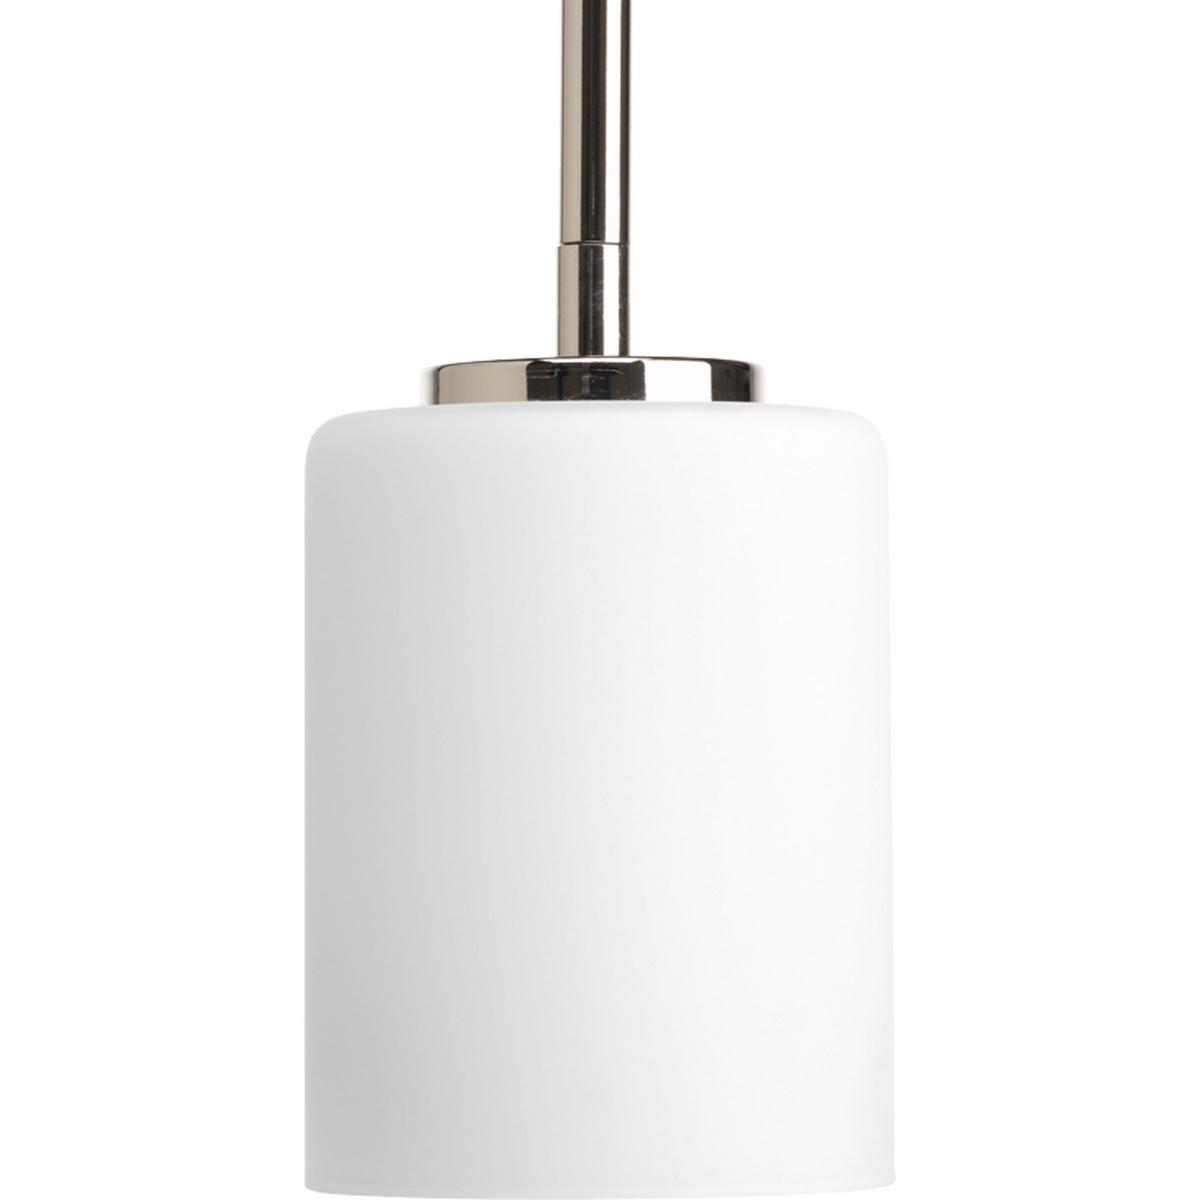 Hubbell P5170-104 One-light mini-pendant from the Replay Collection, feature smooth forms, linear details and a pleasingly elegant frame enhance a simplified modern look. Polished Nickel finish.  ; Smooth forms and linear details. ; Pleasingly elegant frame. ; Simplified m